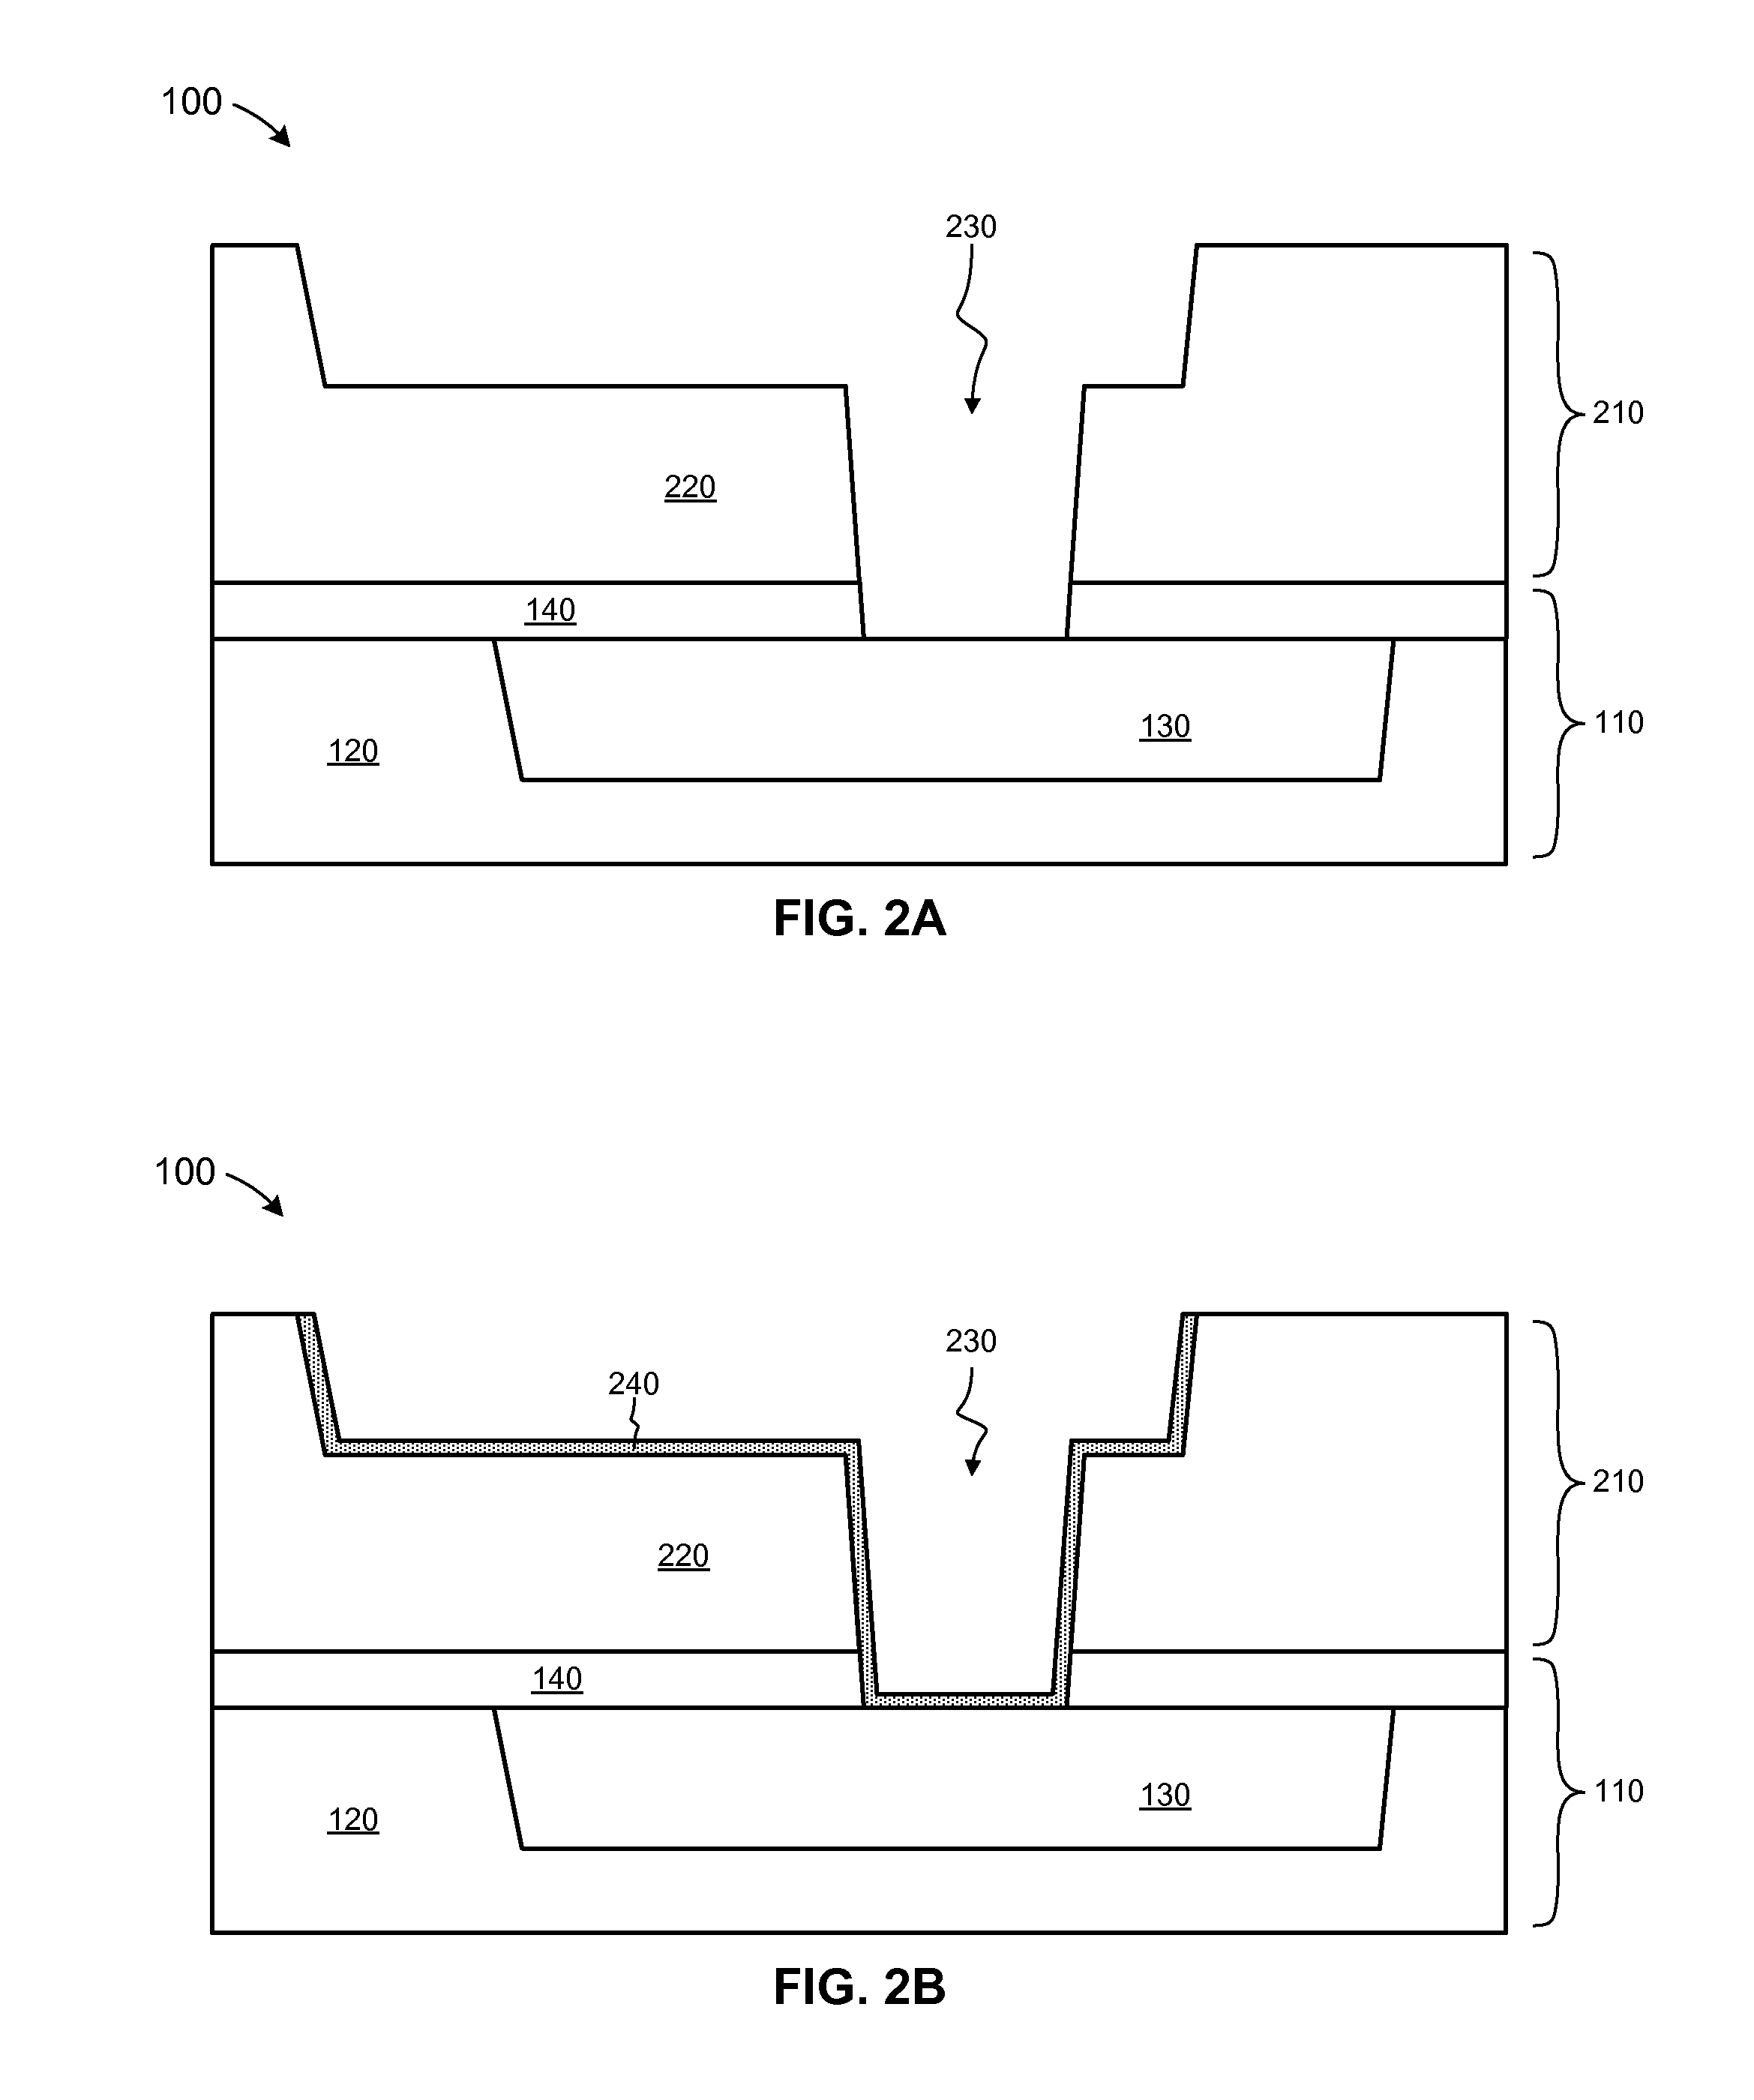 Self-forming embedded diffusion barriers